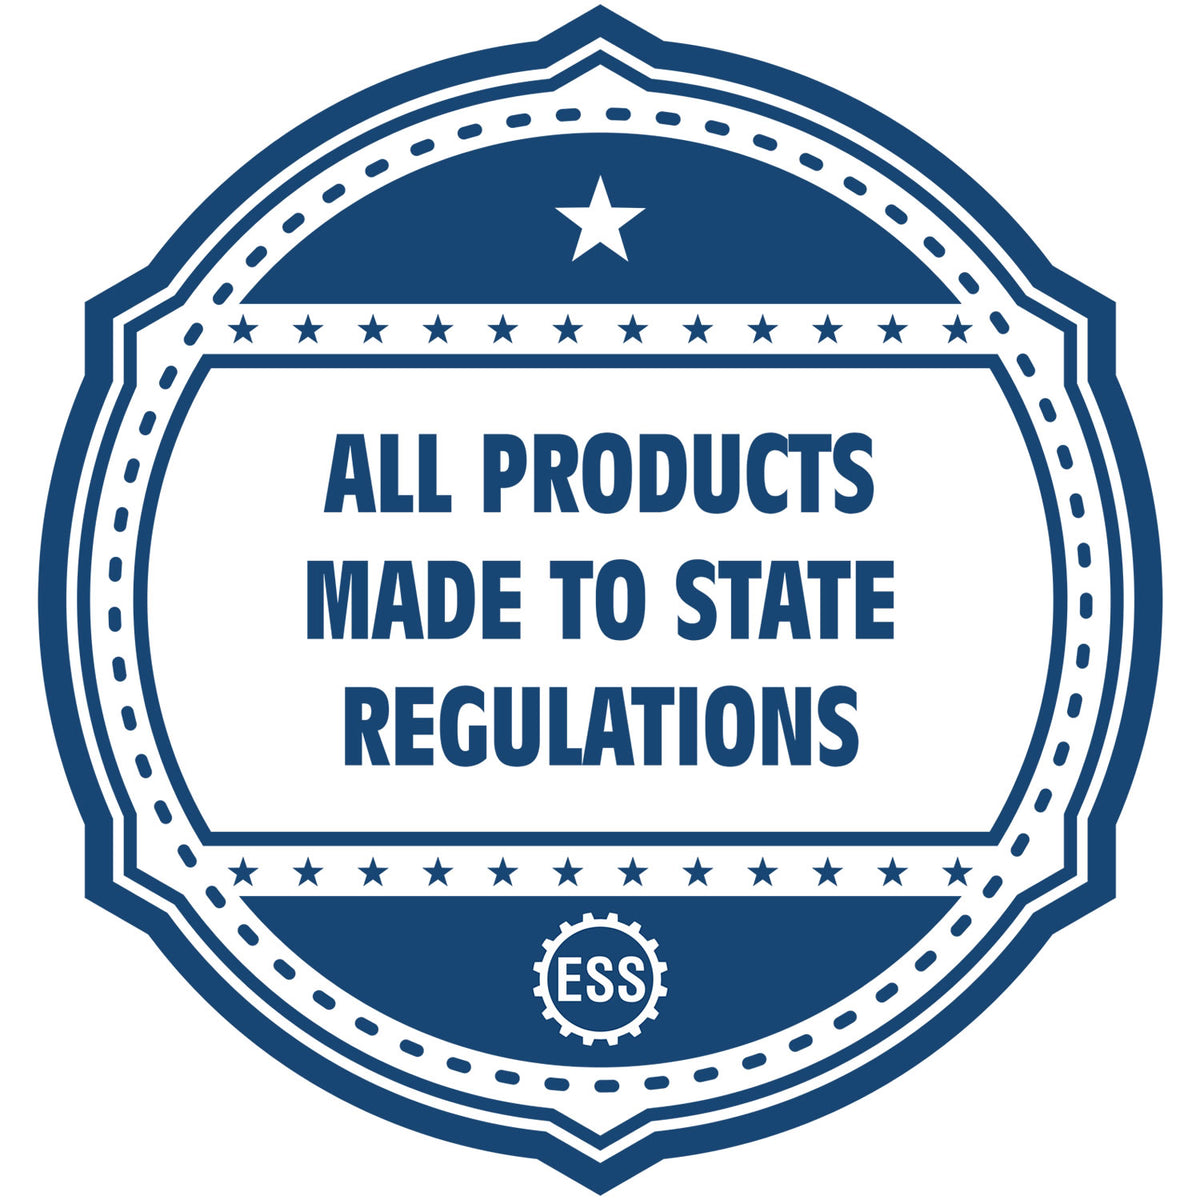 An icon or badge element for the Heavy-Duty Arkansas Rectangular Notary Stamp showing that this product is made in compliance with state regulations.